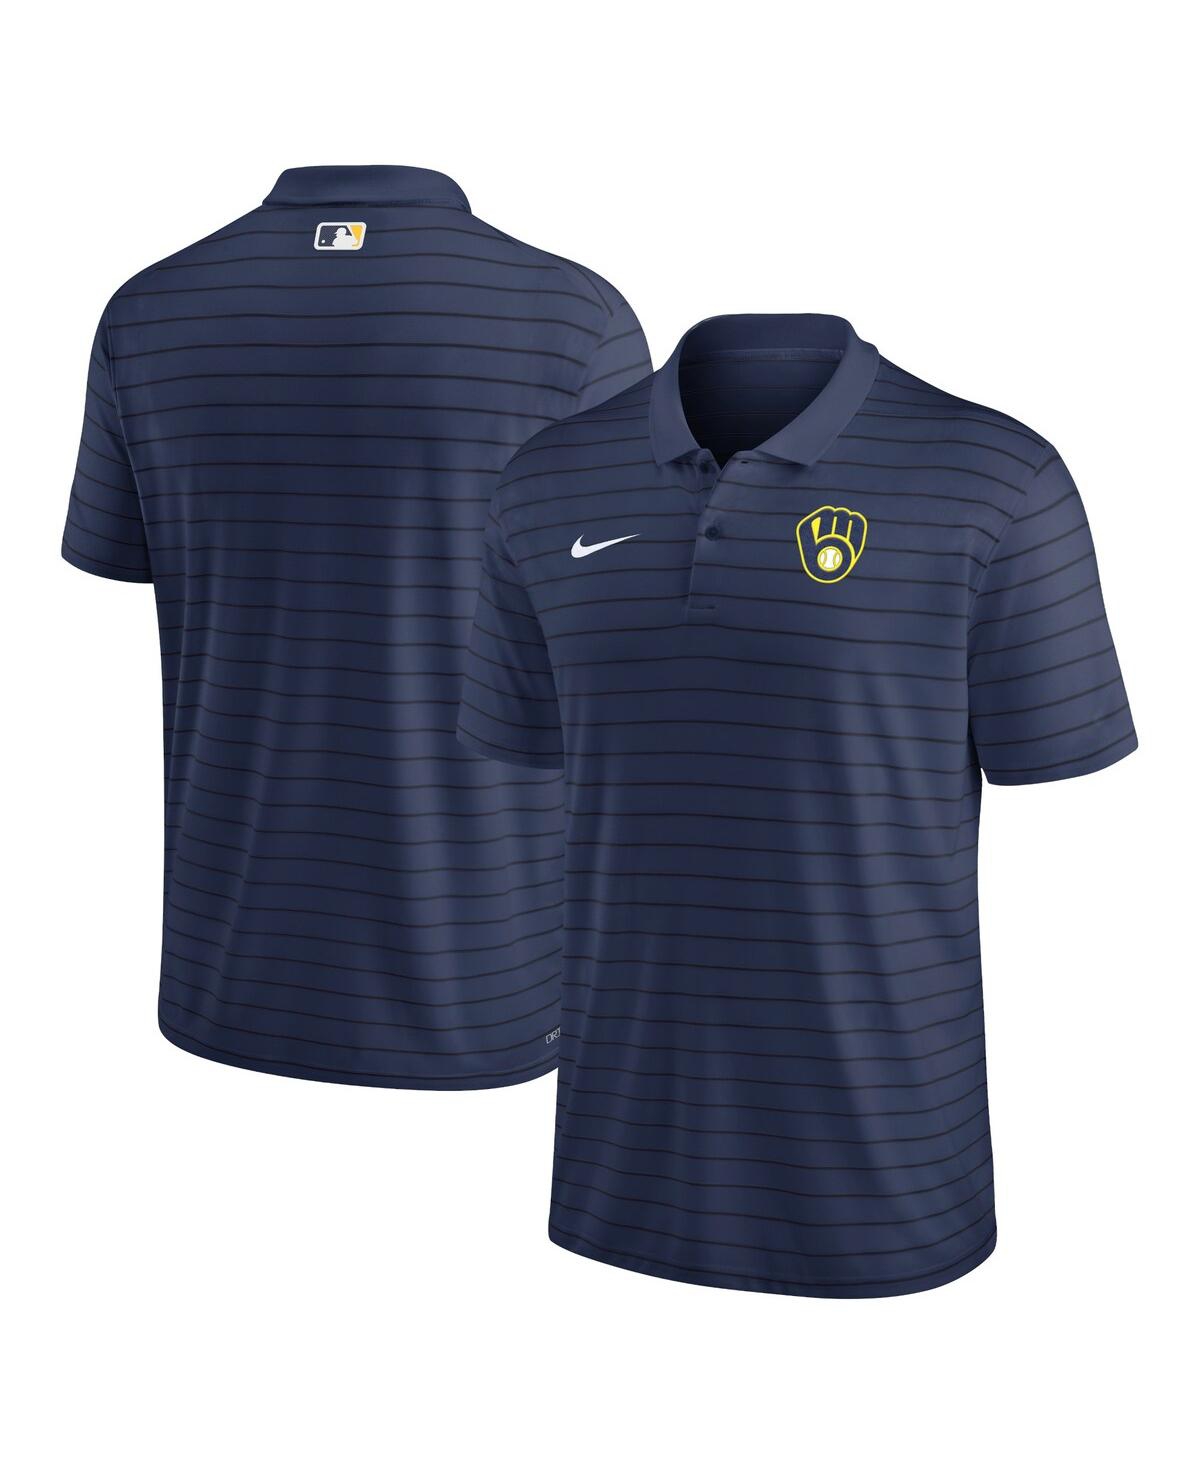 Men's Nike Navy Milwaukee Brewers Authentic Collection Victory Striped Performance Polo Shirt - Navy